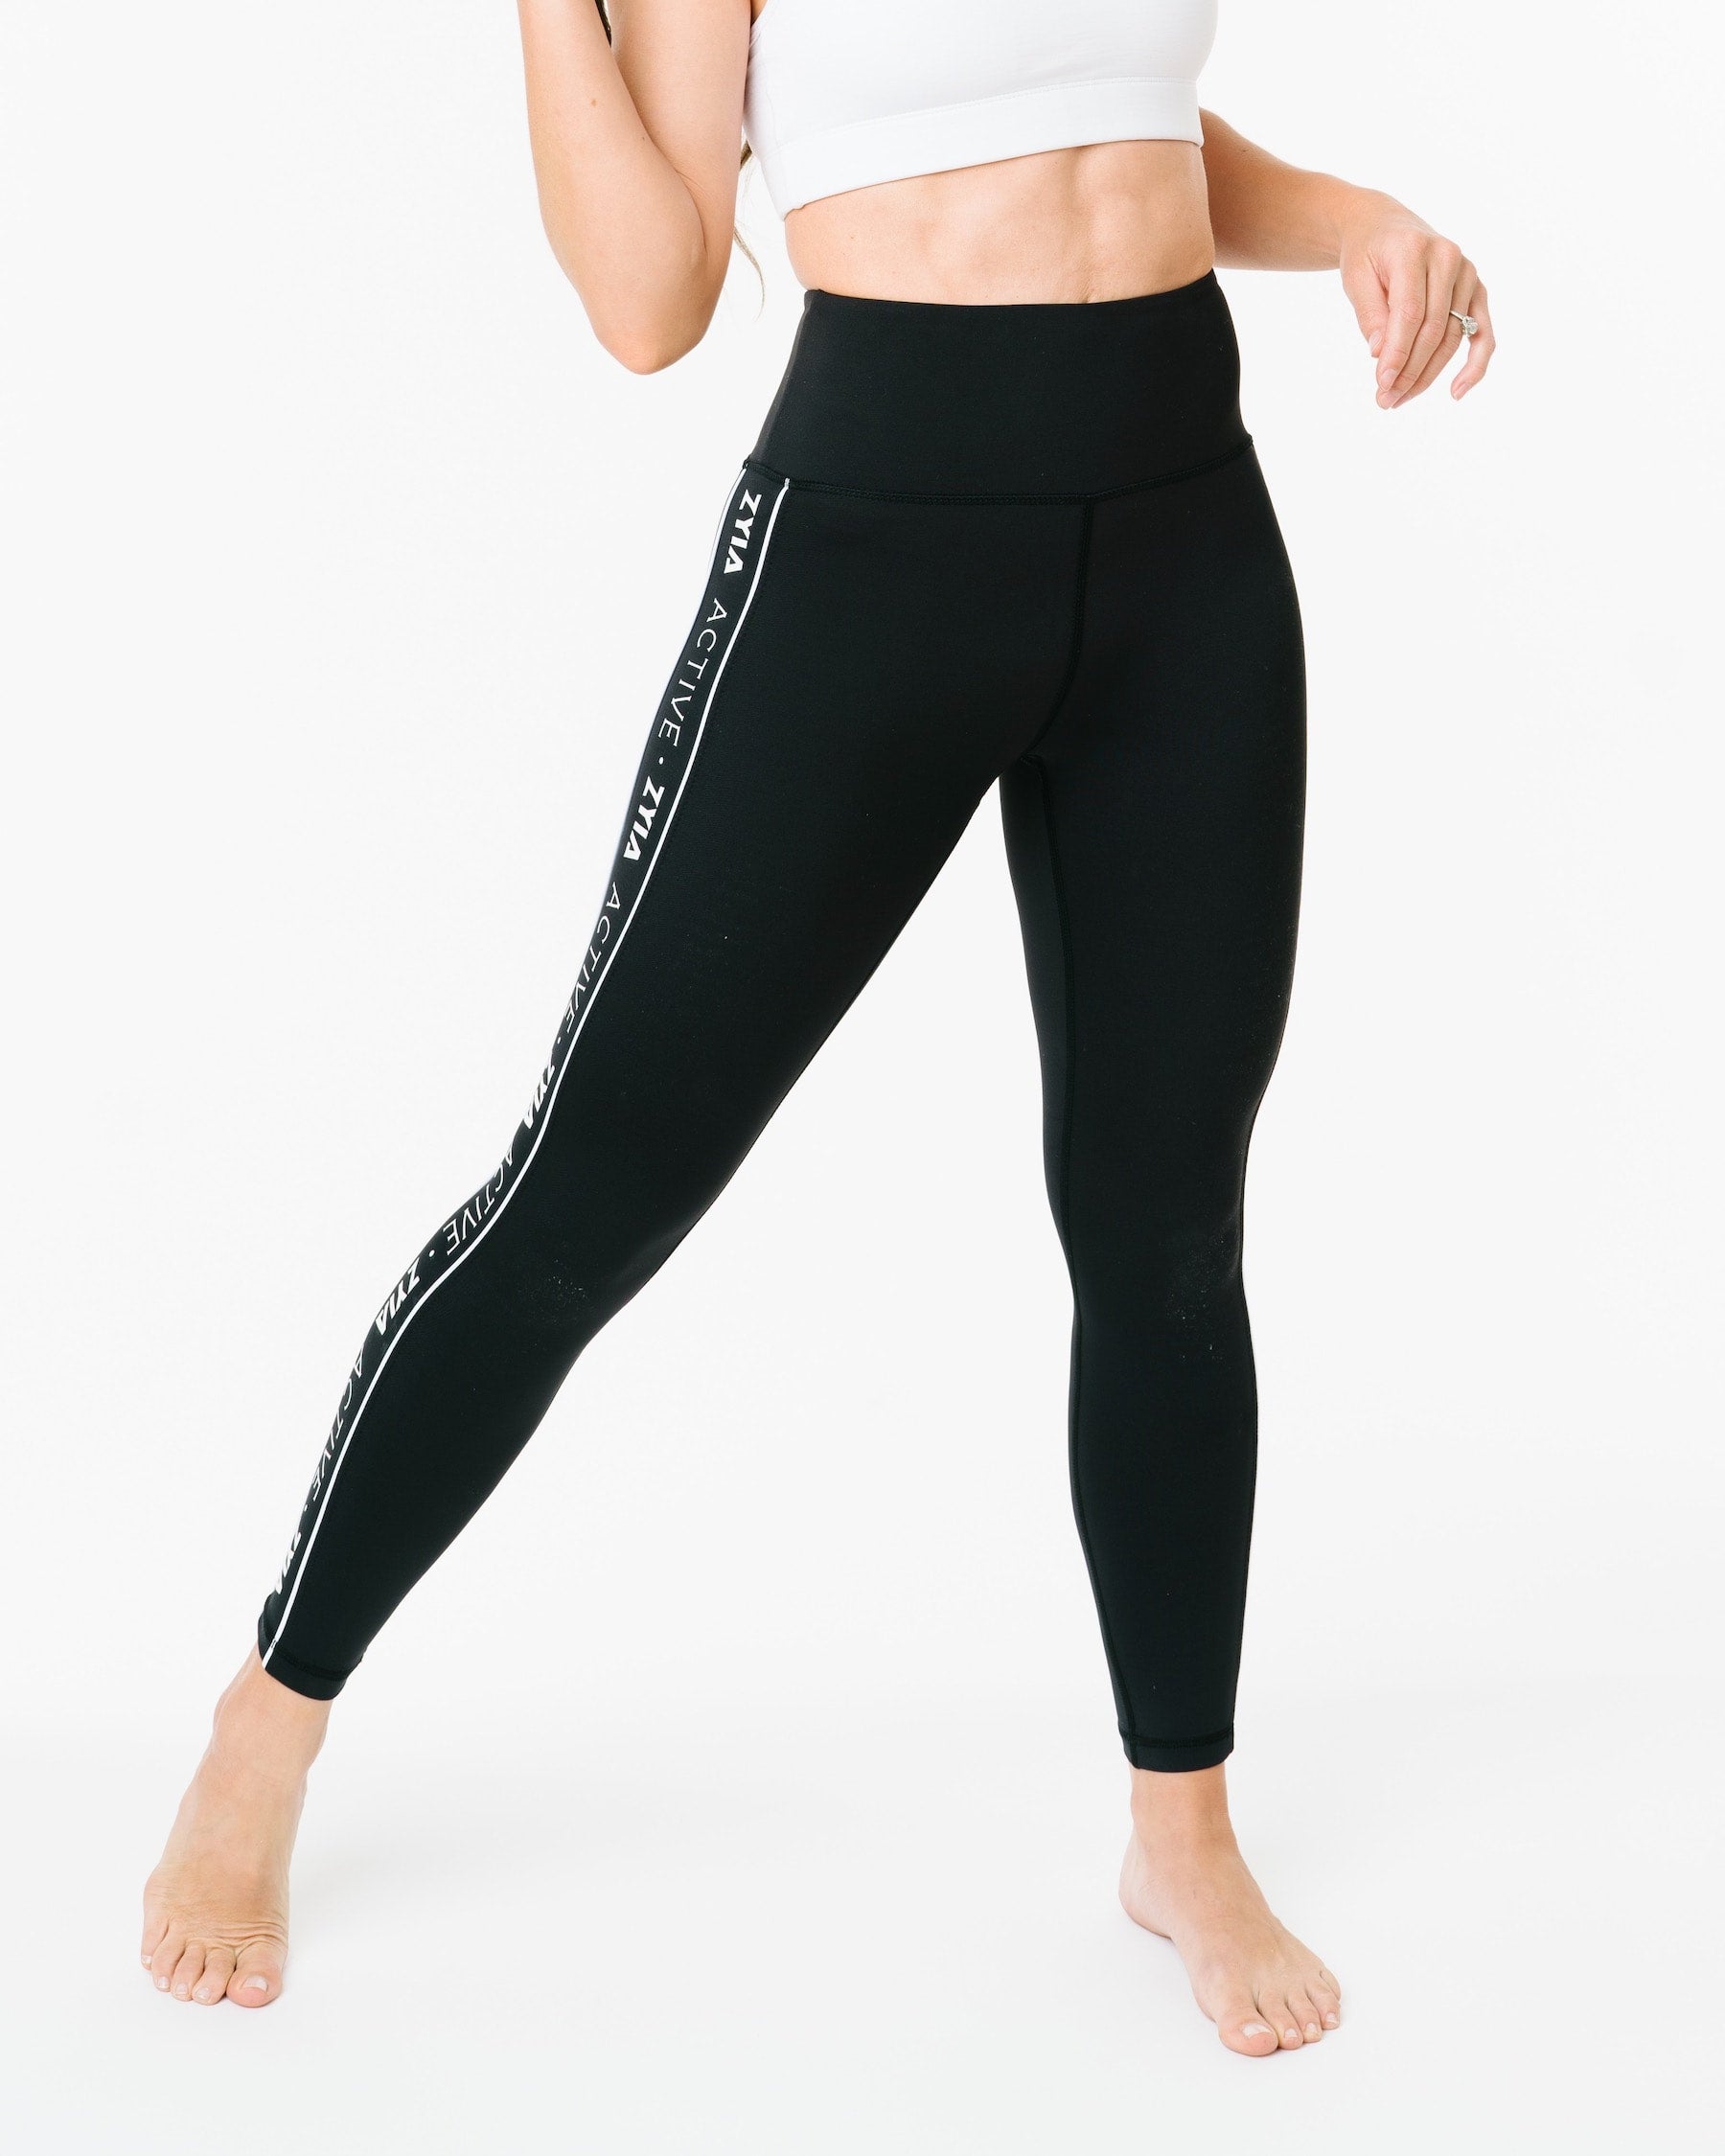 Our most popular leggings, this high-performance design offers a